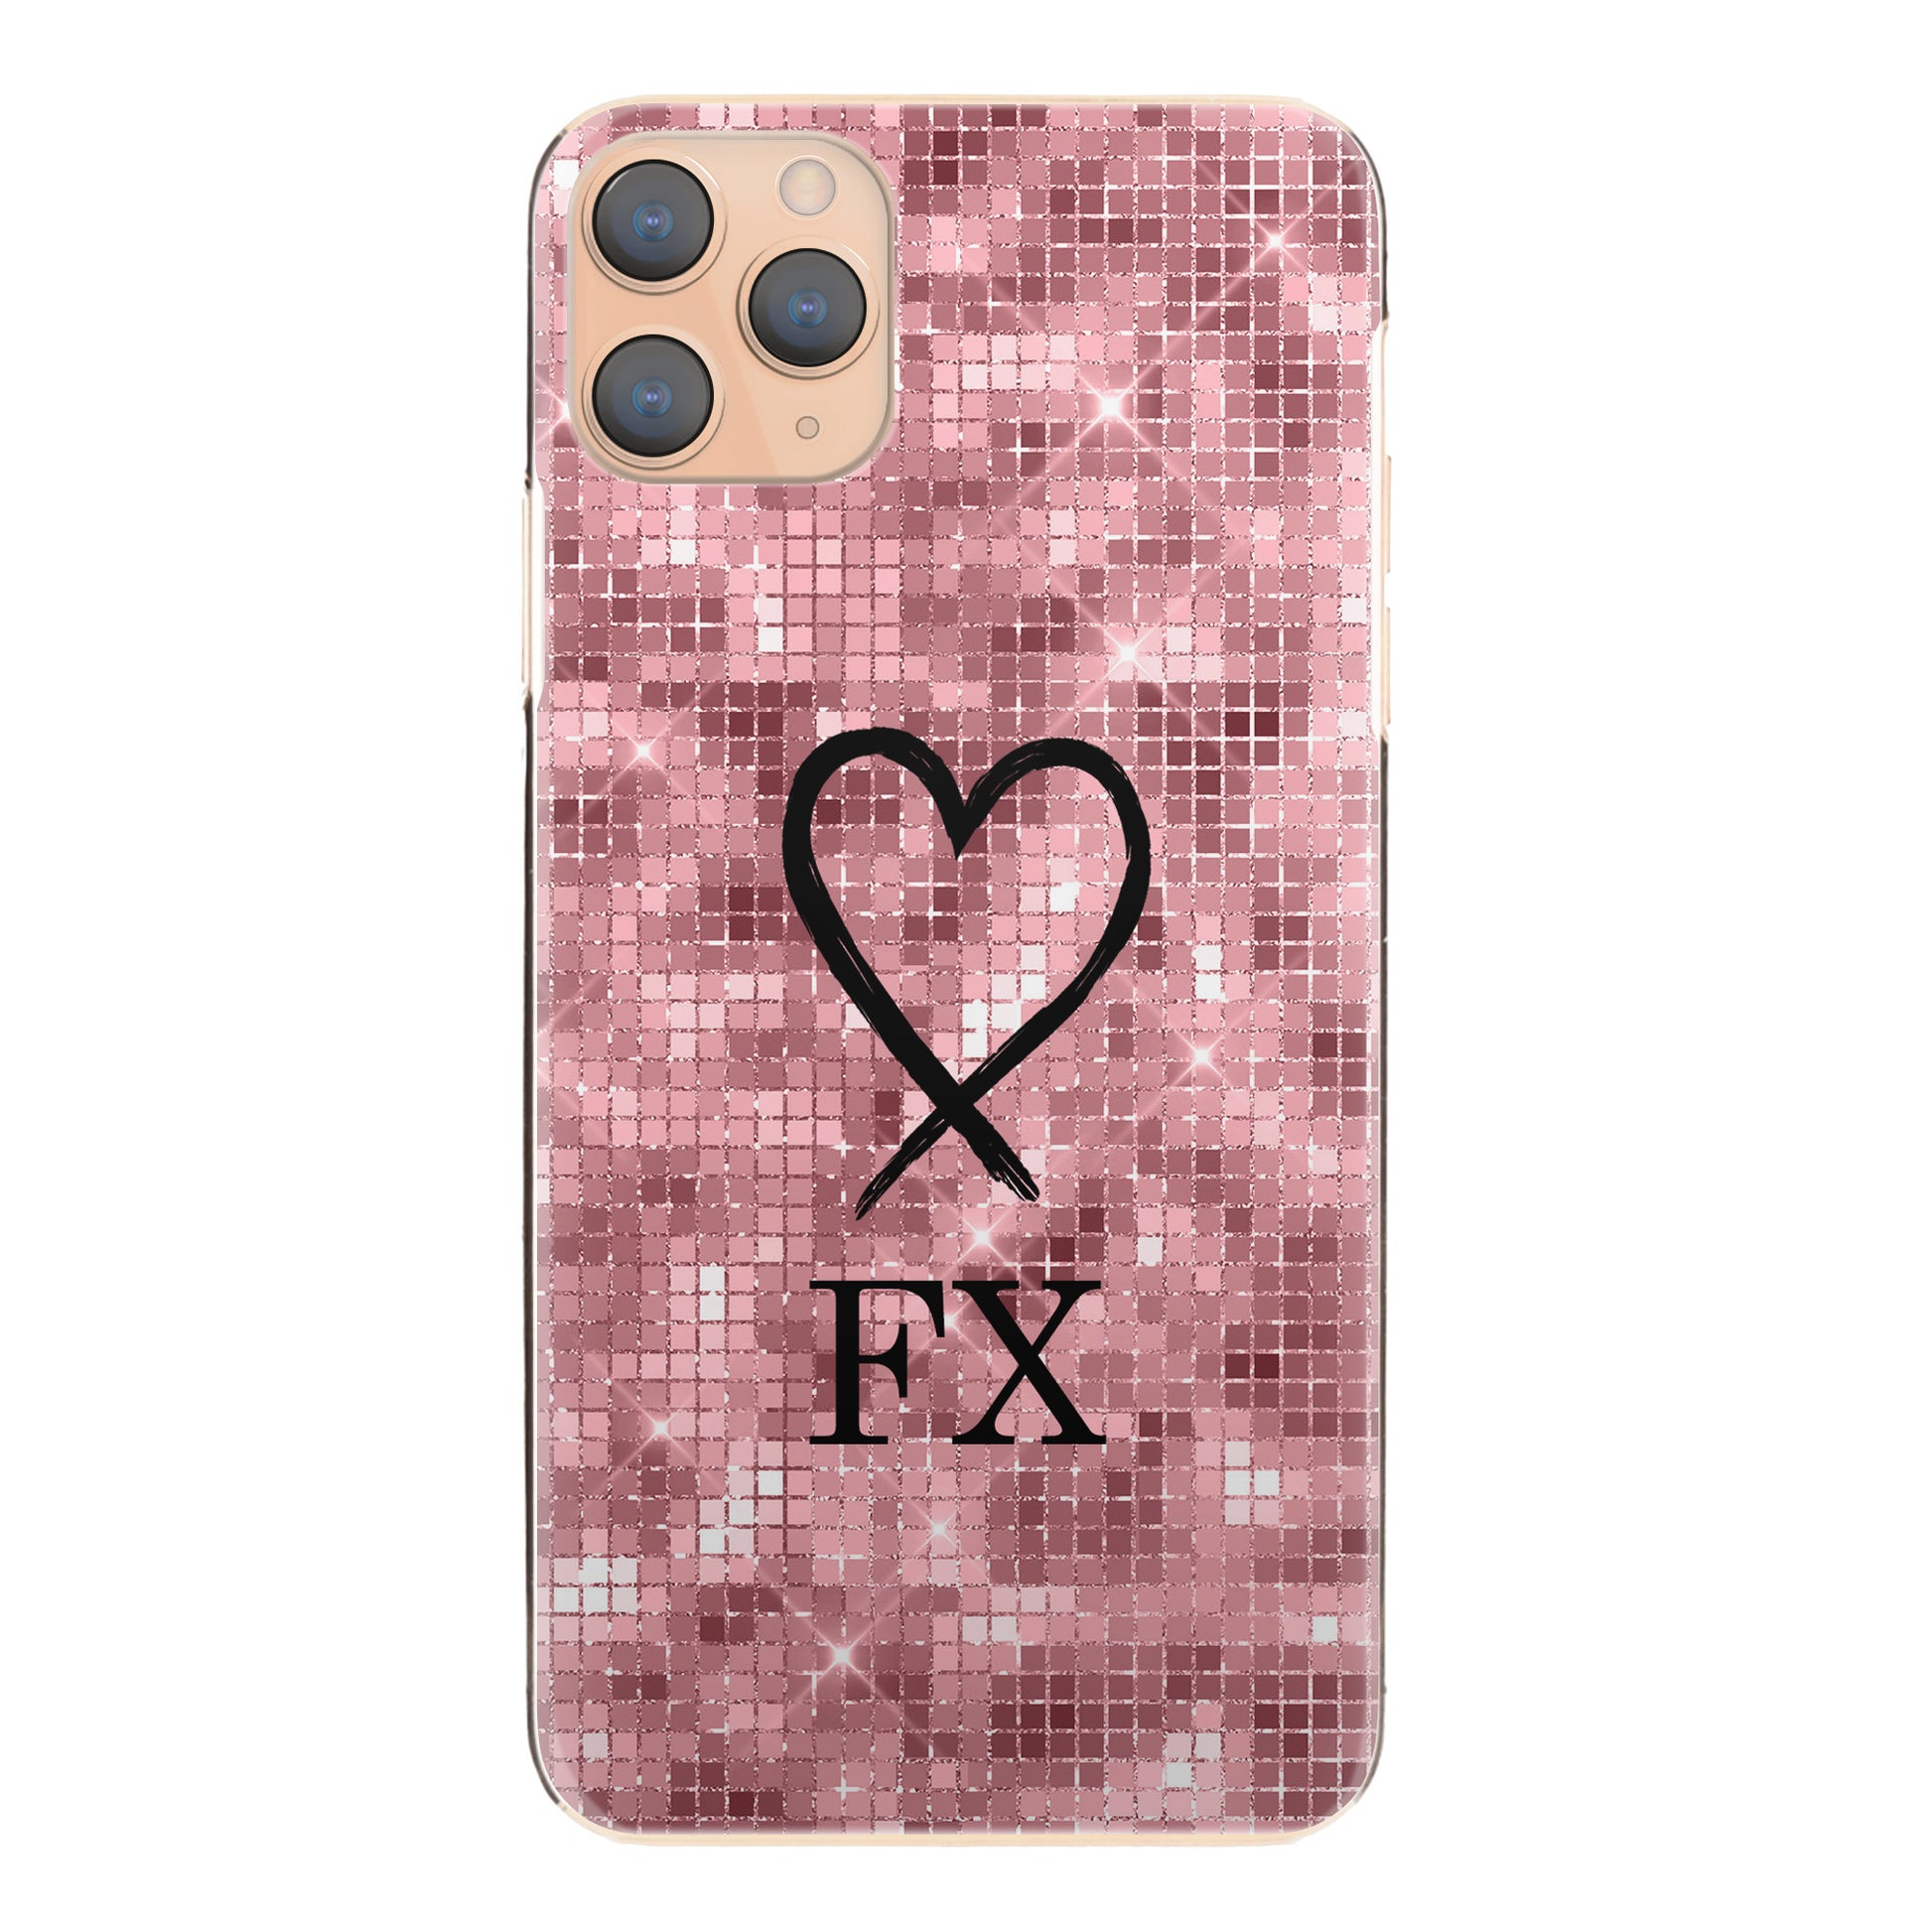 Personalised LG Phone Hard Case with Heart Sketch and Initials on Pink Disco Ball